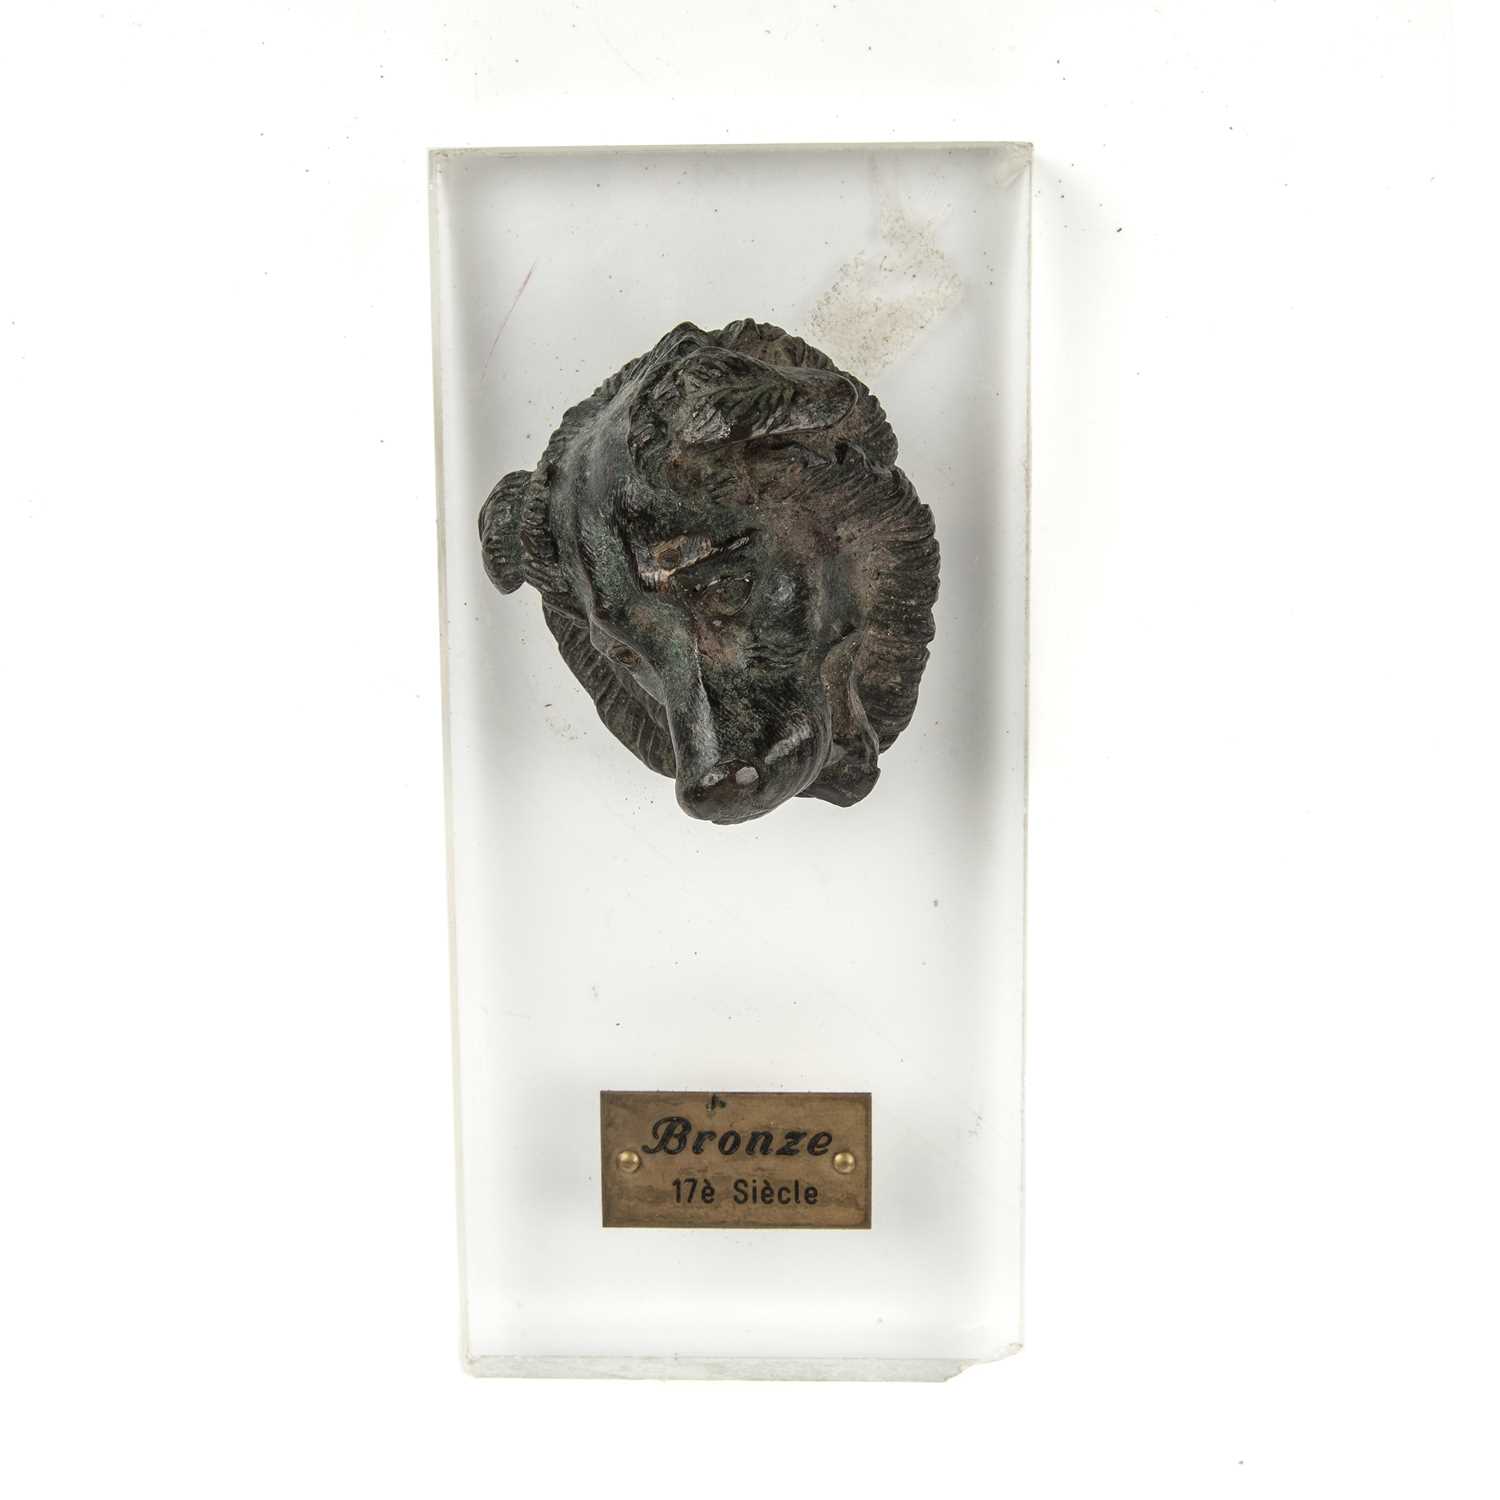 A 17th or 18th century bronze head of a dog, 6cm wide x 6cm deep x 7cm highSome small holes around